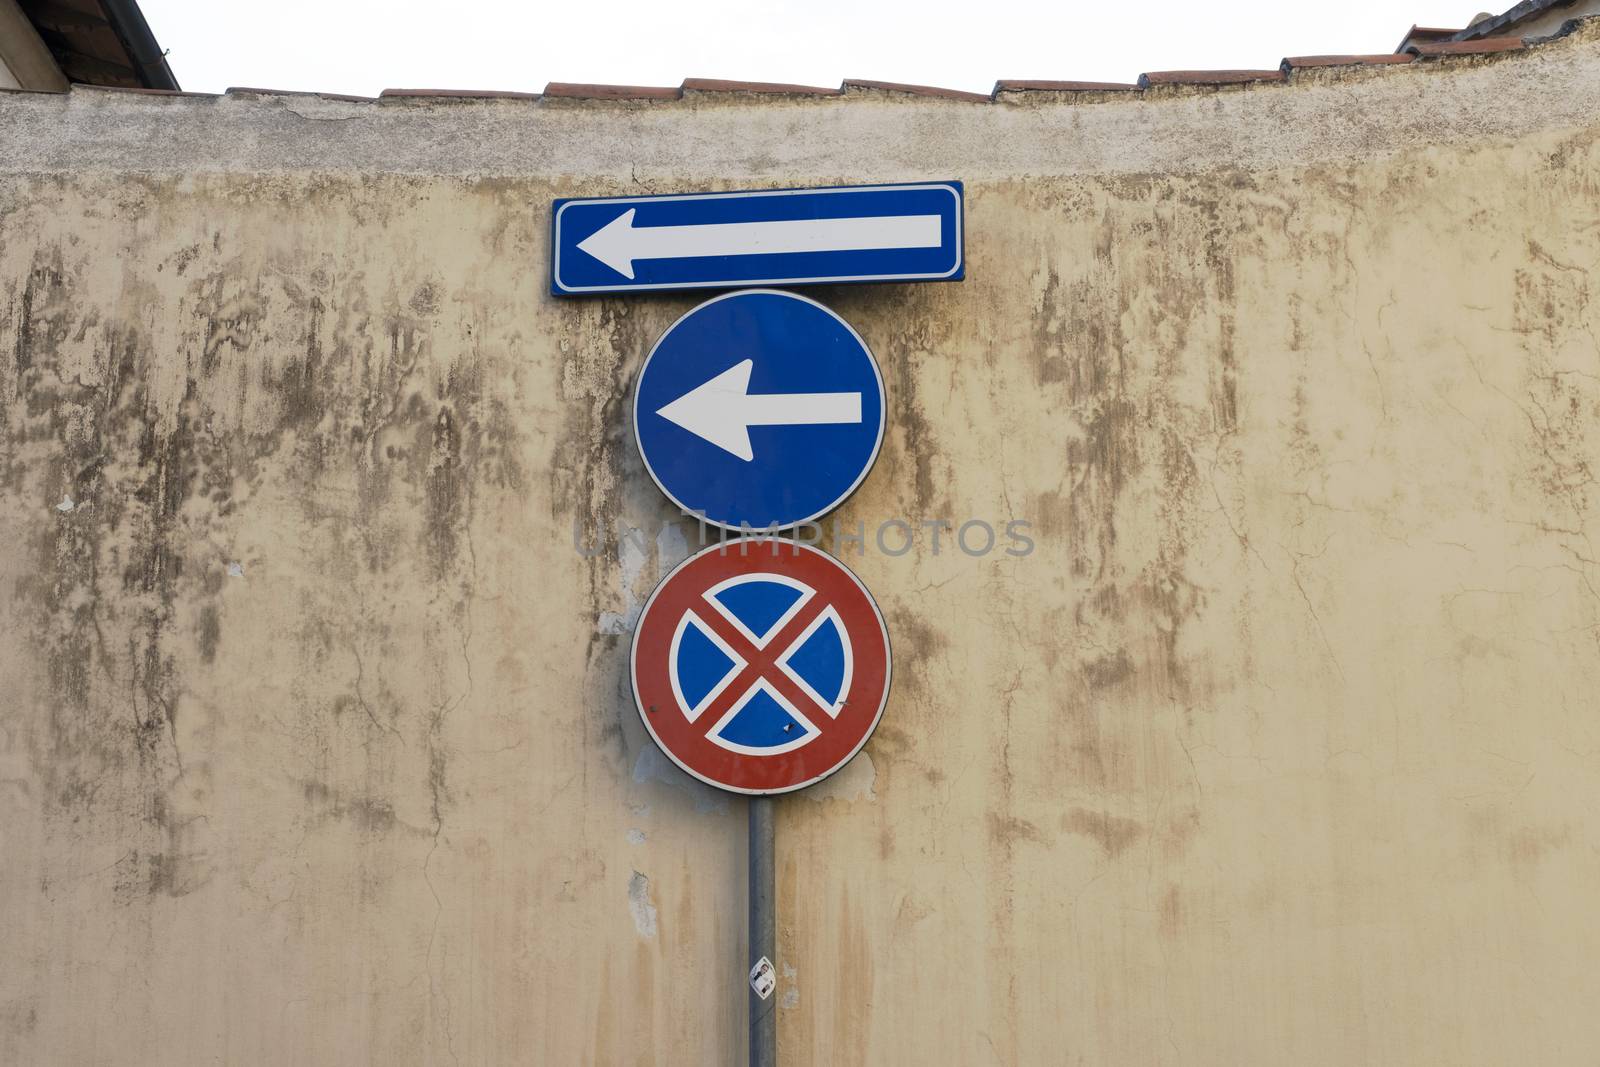 Old blue metallic arrow sign against a damaged concrete wall indicating to go left and no parking sign - concept image